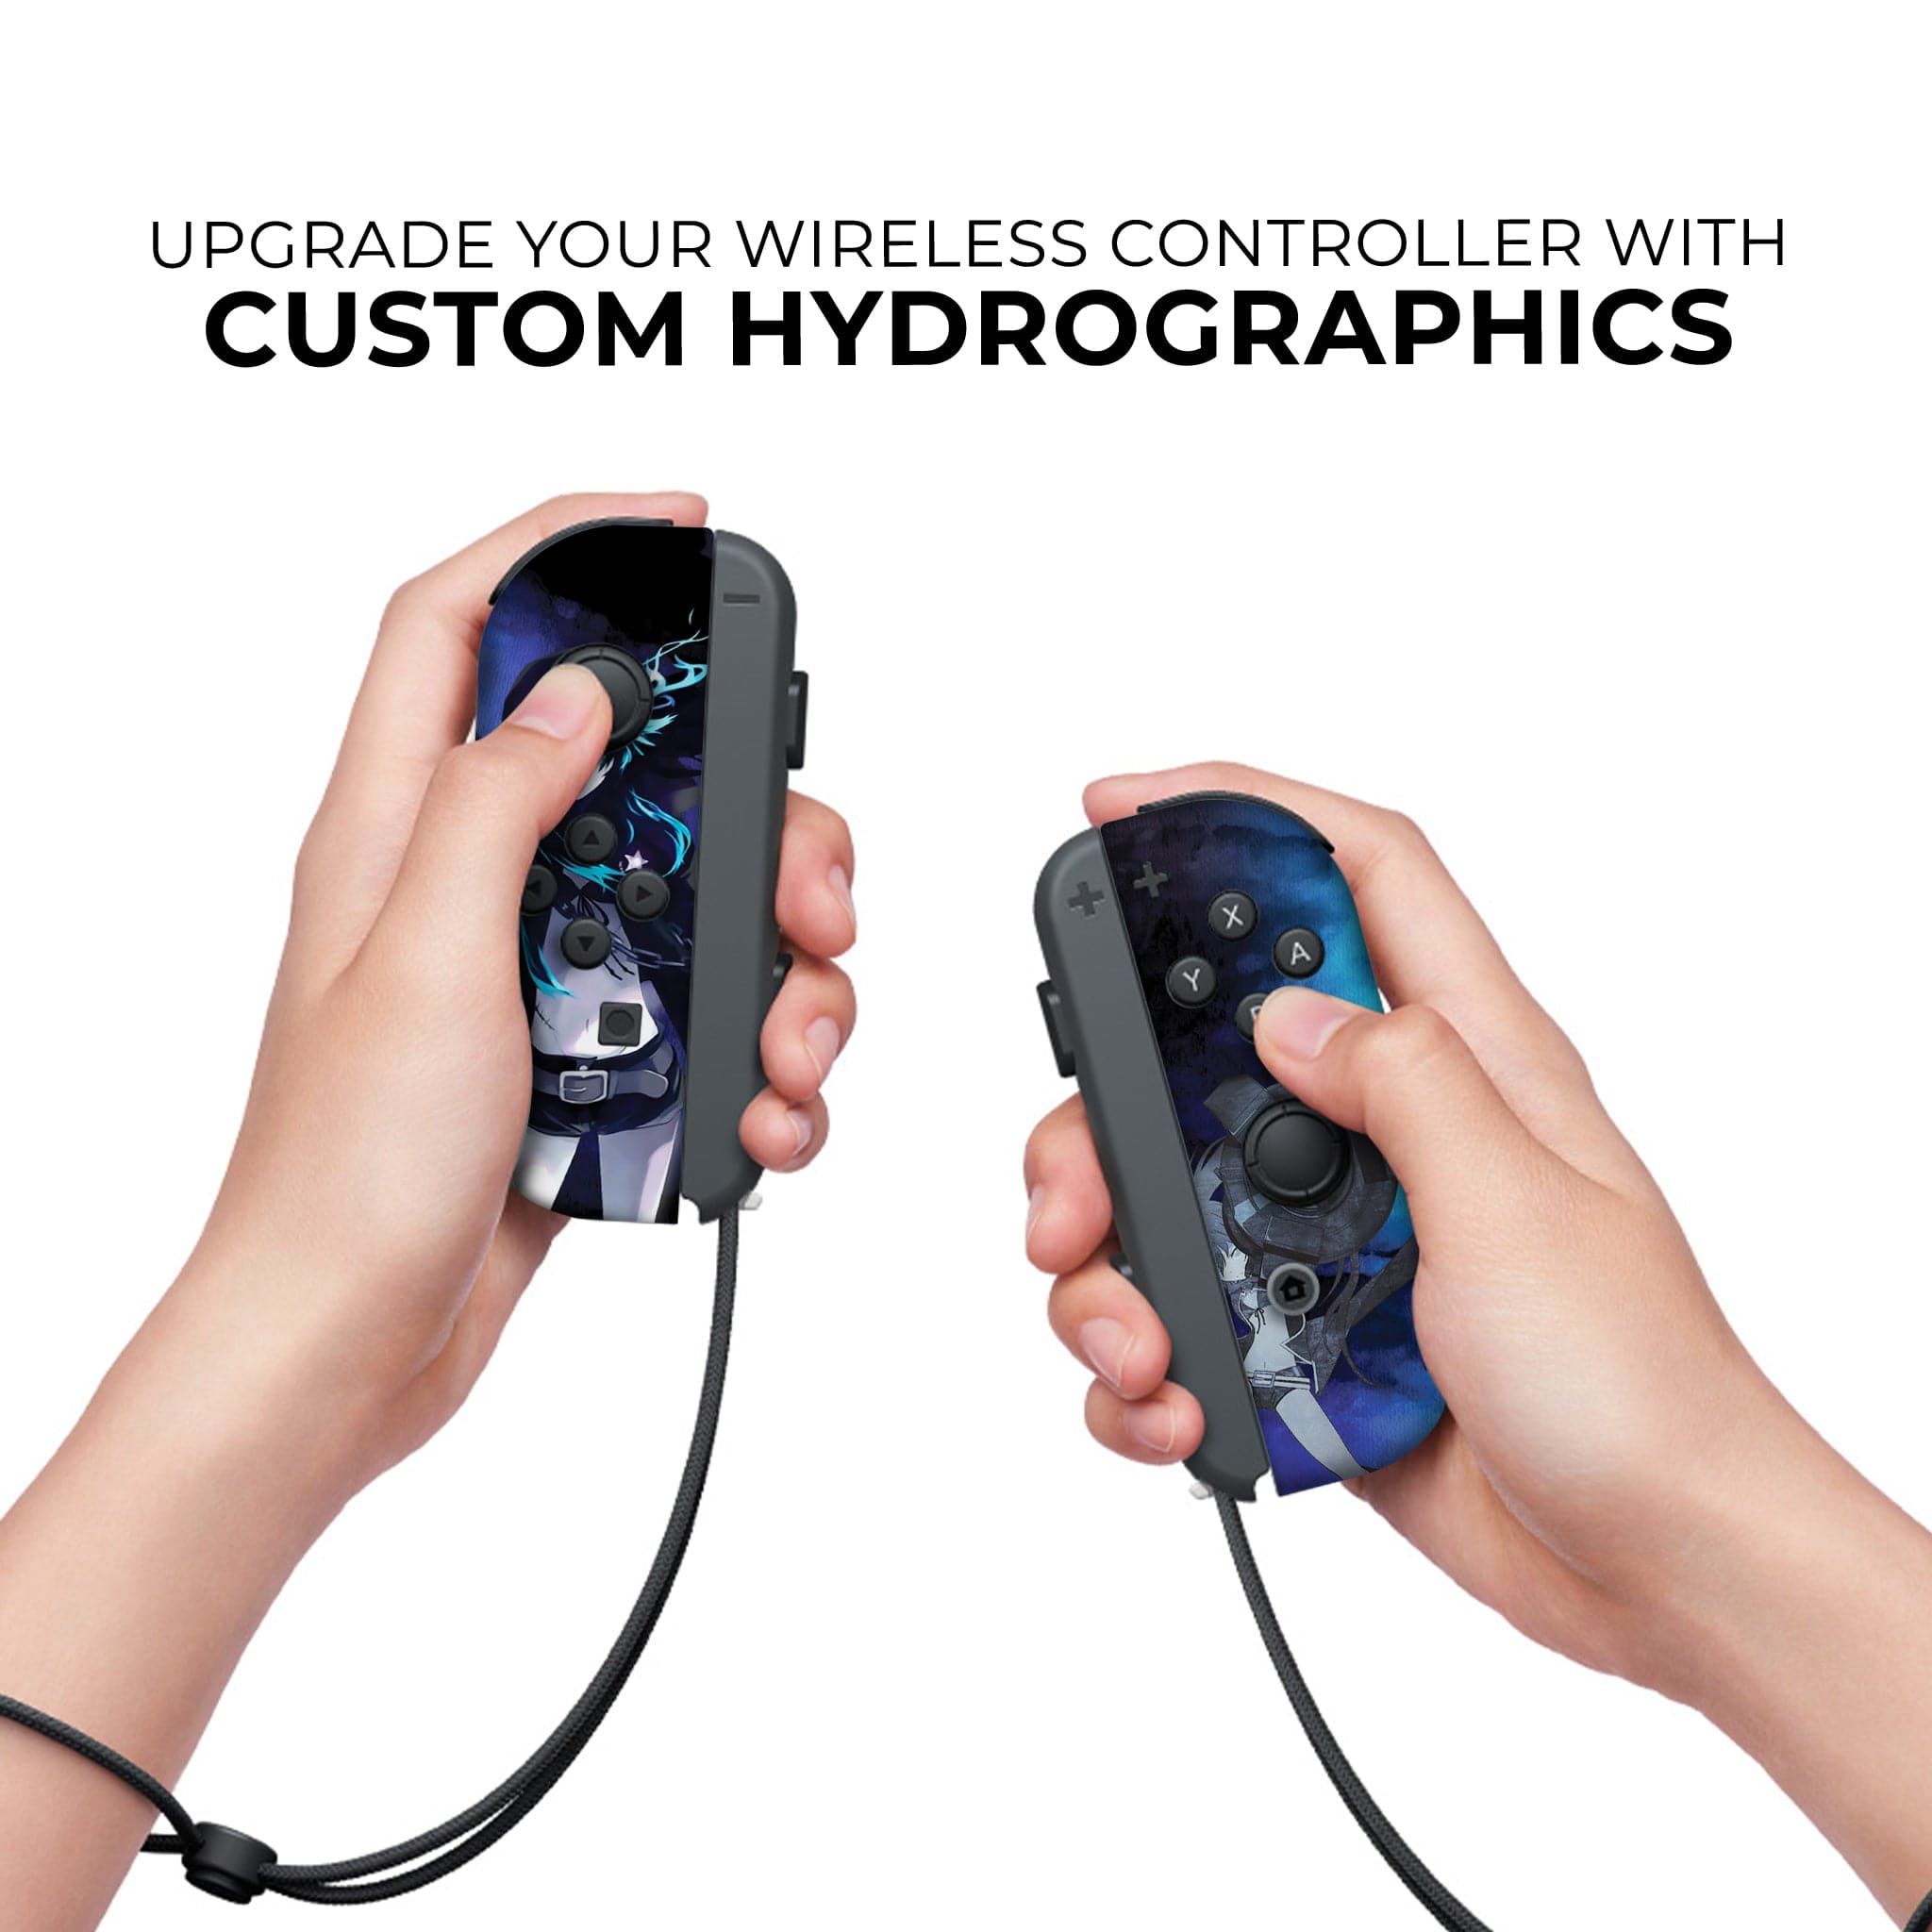 BLACK ROCK SHOOTER Inspired Nintendo Switch Joy-Con Left and Right Switch Controllers by Nintendo